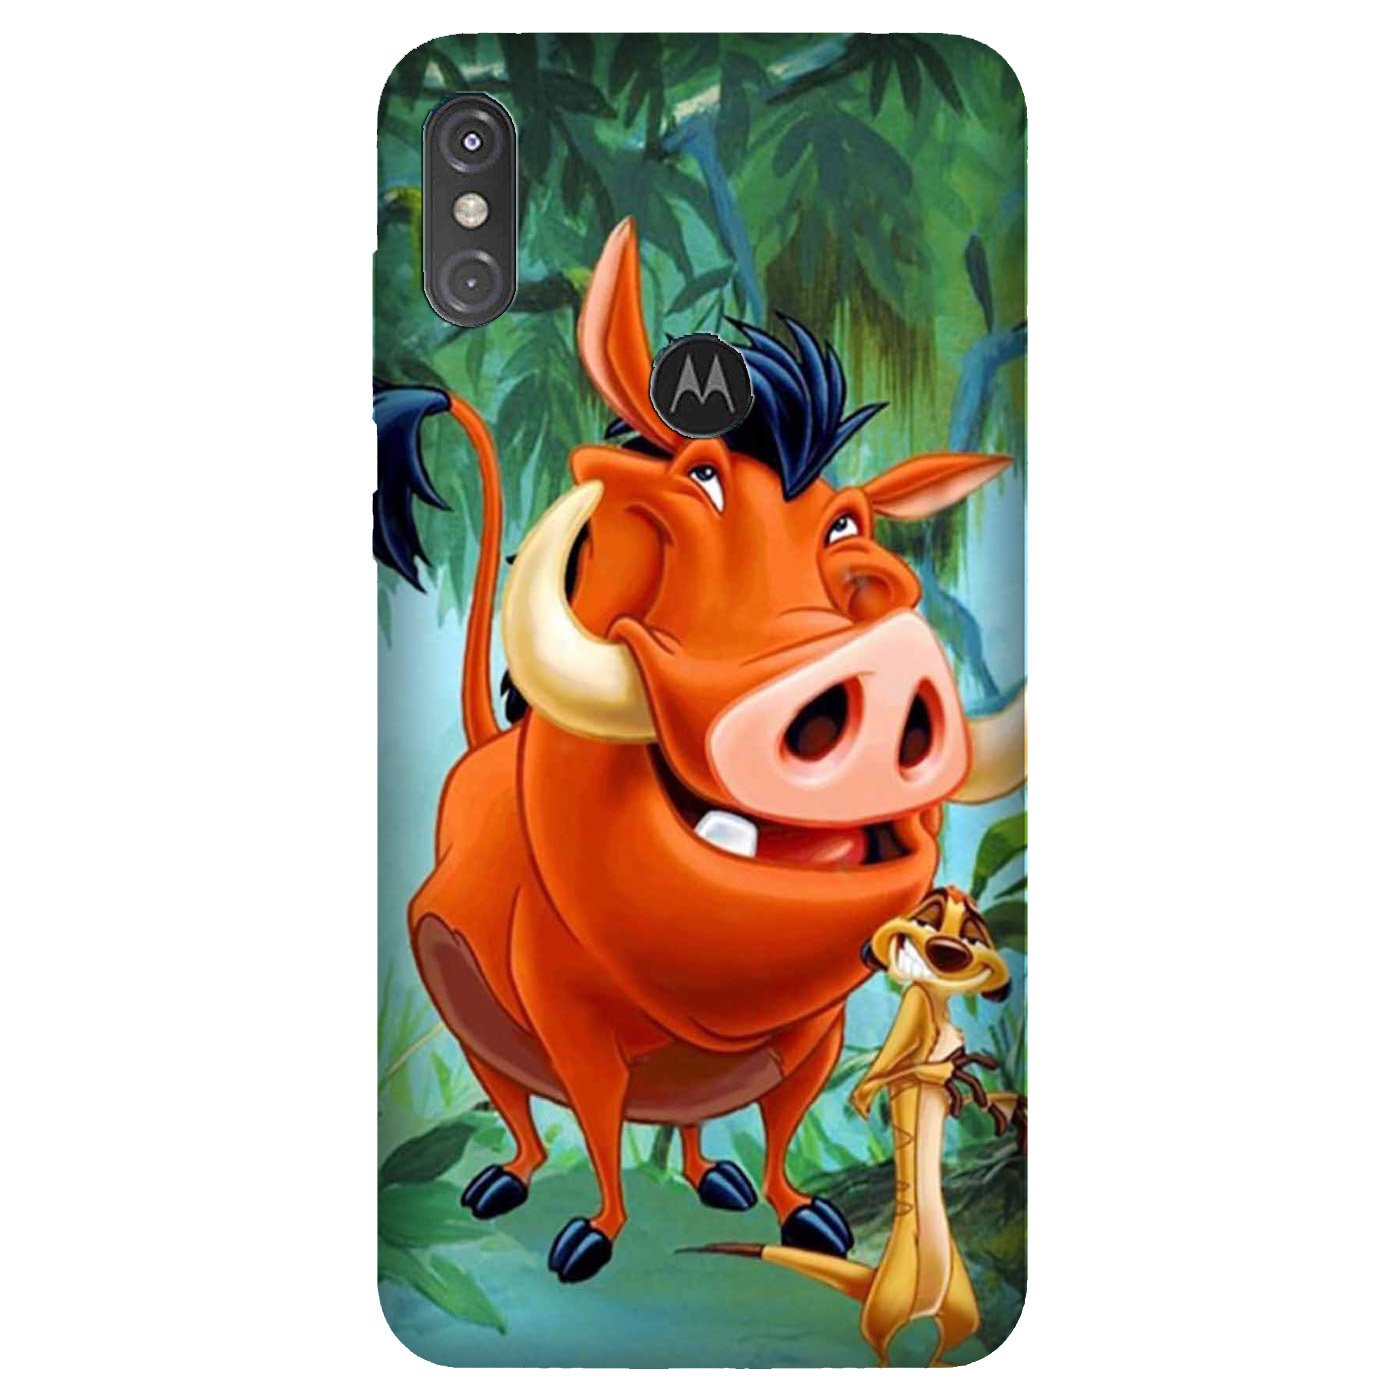 Timon and Pumbaa Mobile Back Case for Moto One Power (Design - 305)